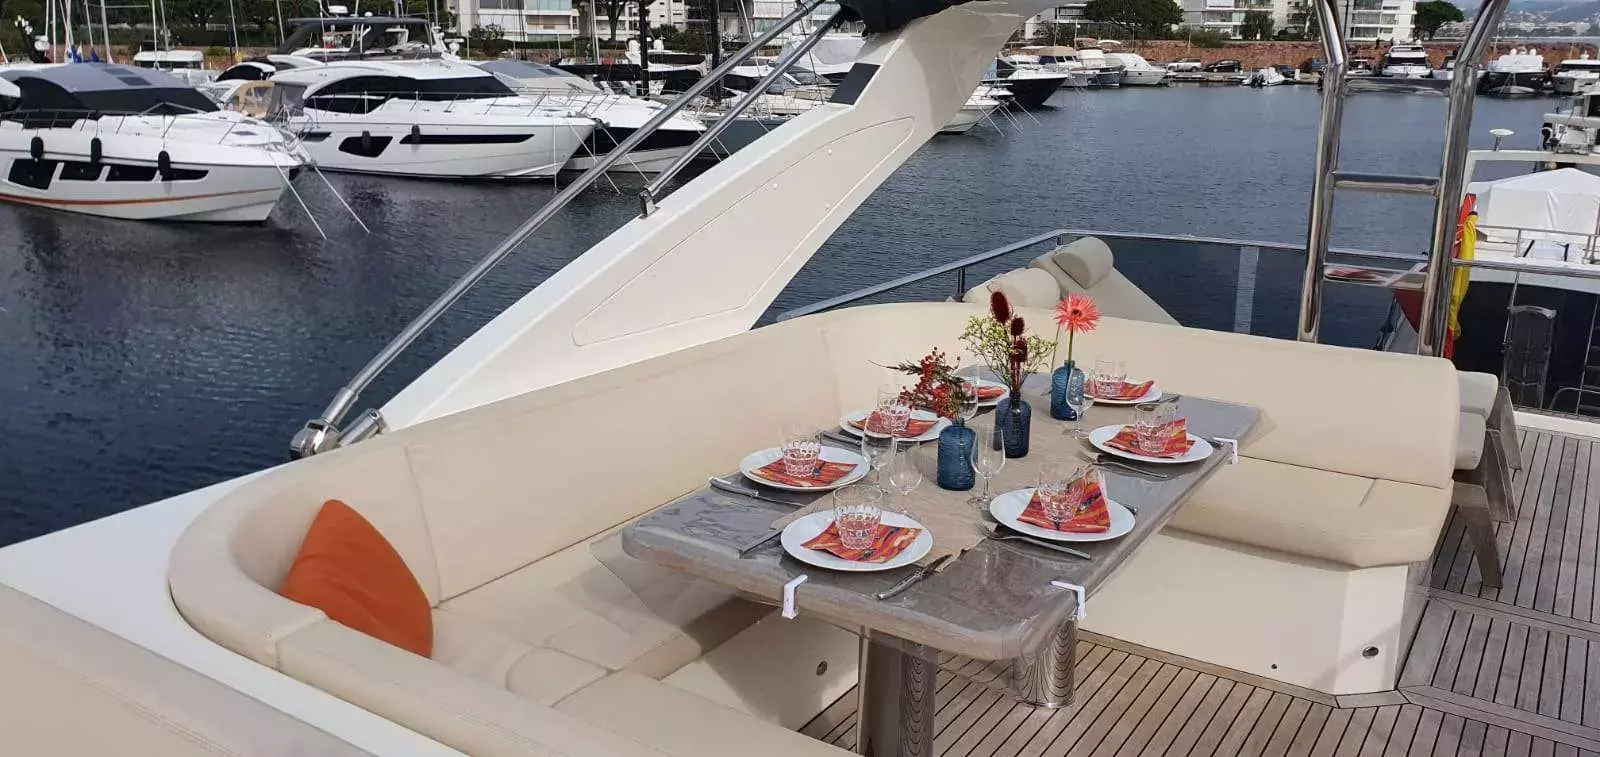 Absolute by Absolute Yachts - Special Offer for a private Motor Yacht Charter in Golfe-Juan with a crew